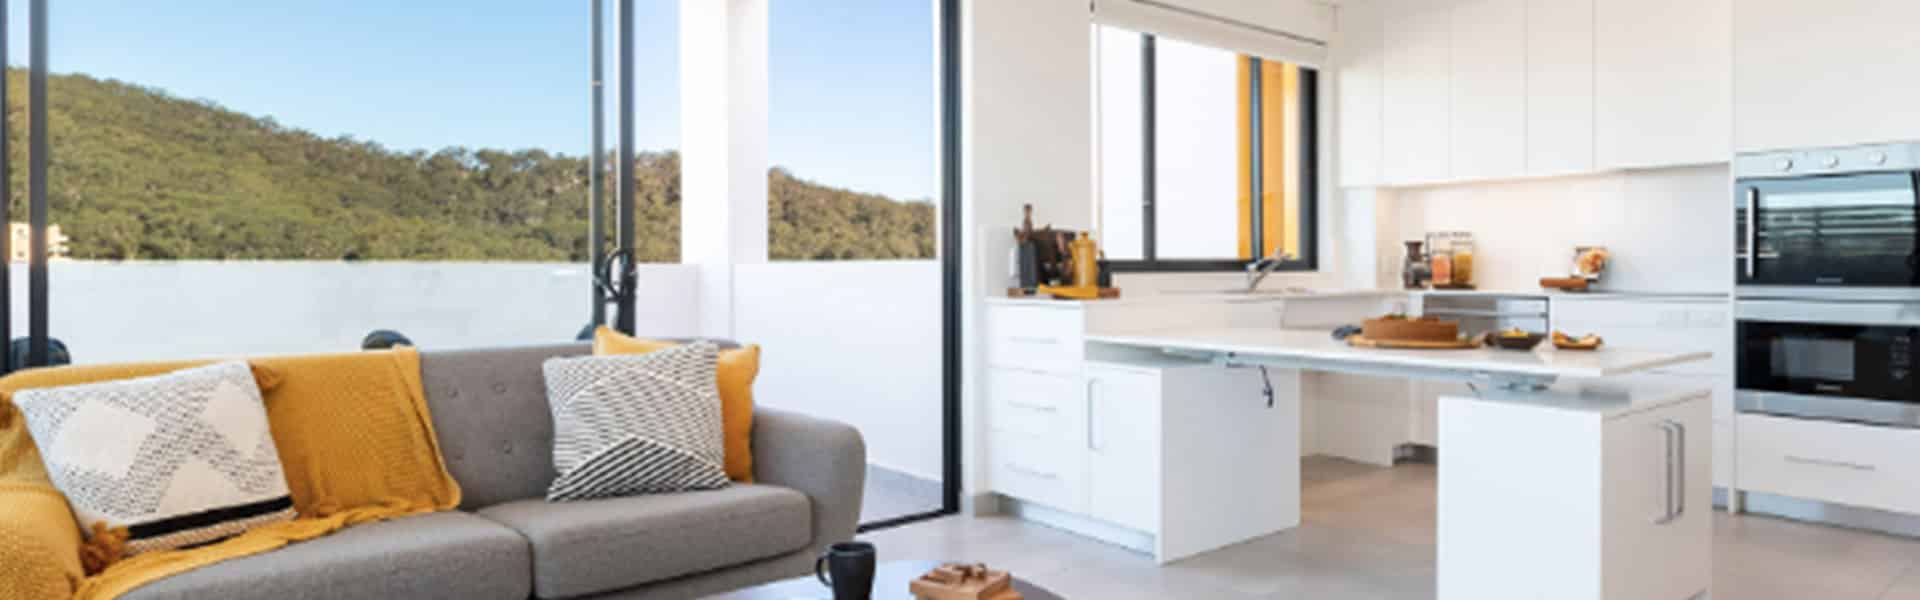 Living with Disability Accommodation Lounge and Kitchen